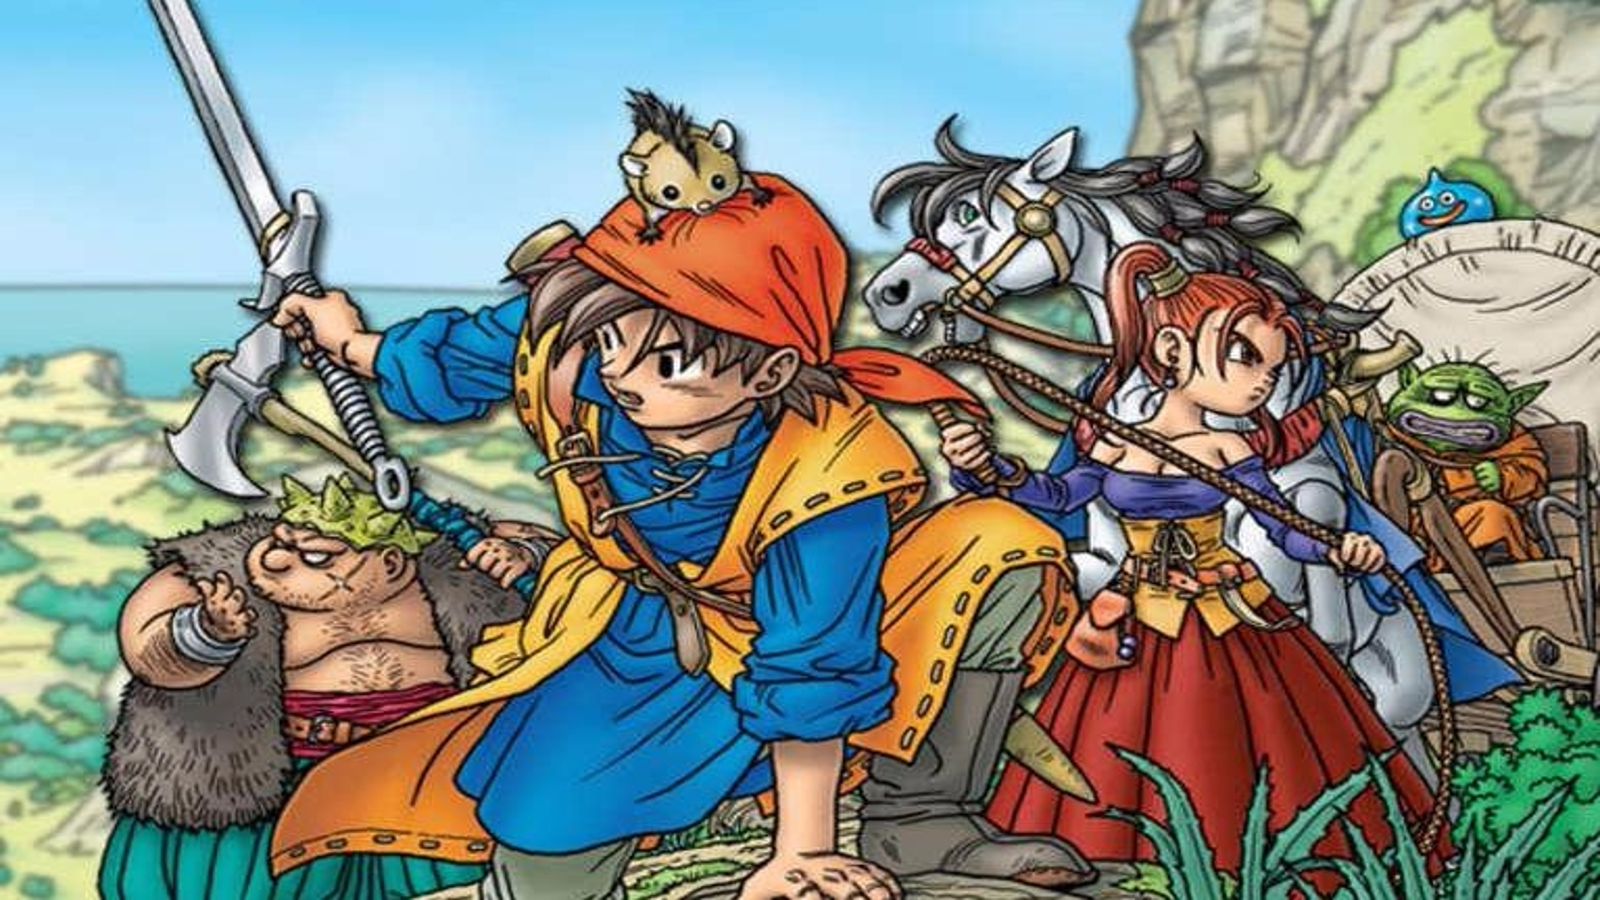 Dragon Quest VIII: Journey of the Cursed King (Nintendo 3DS